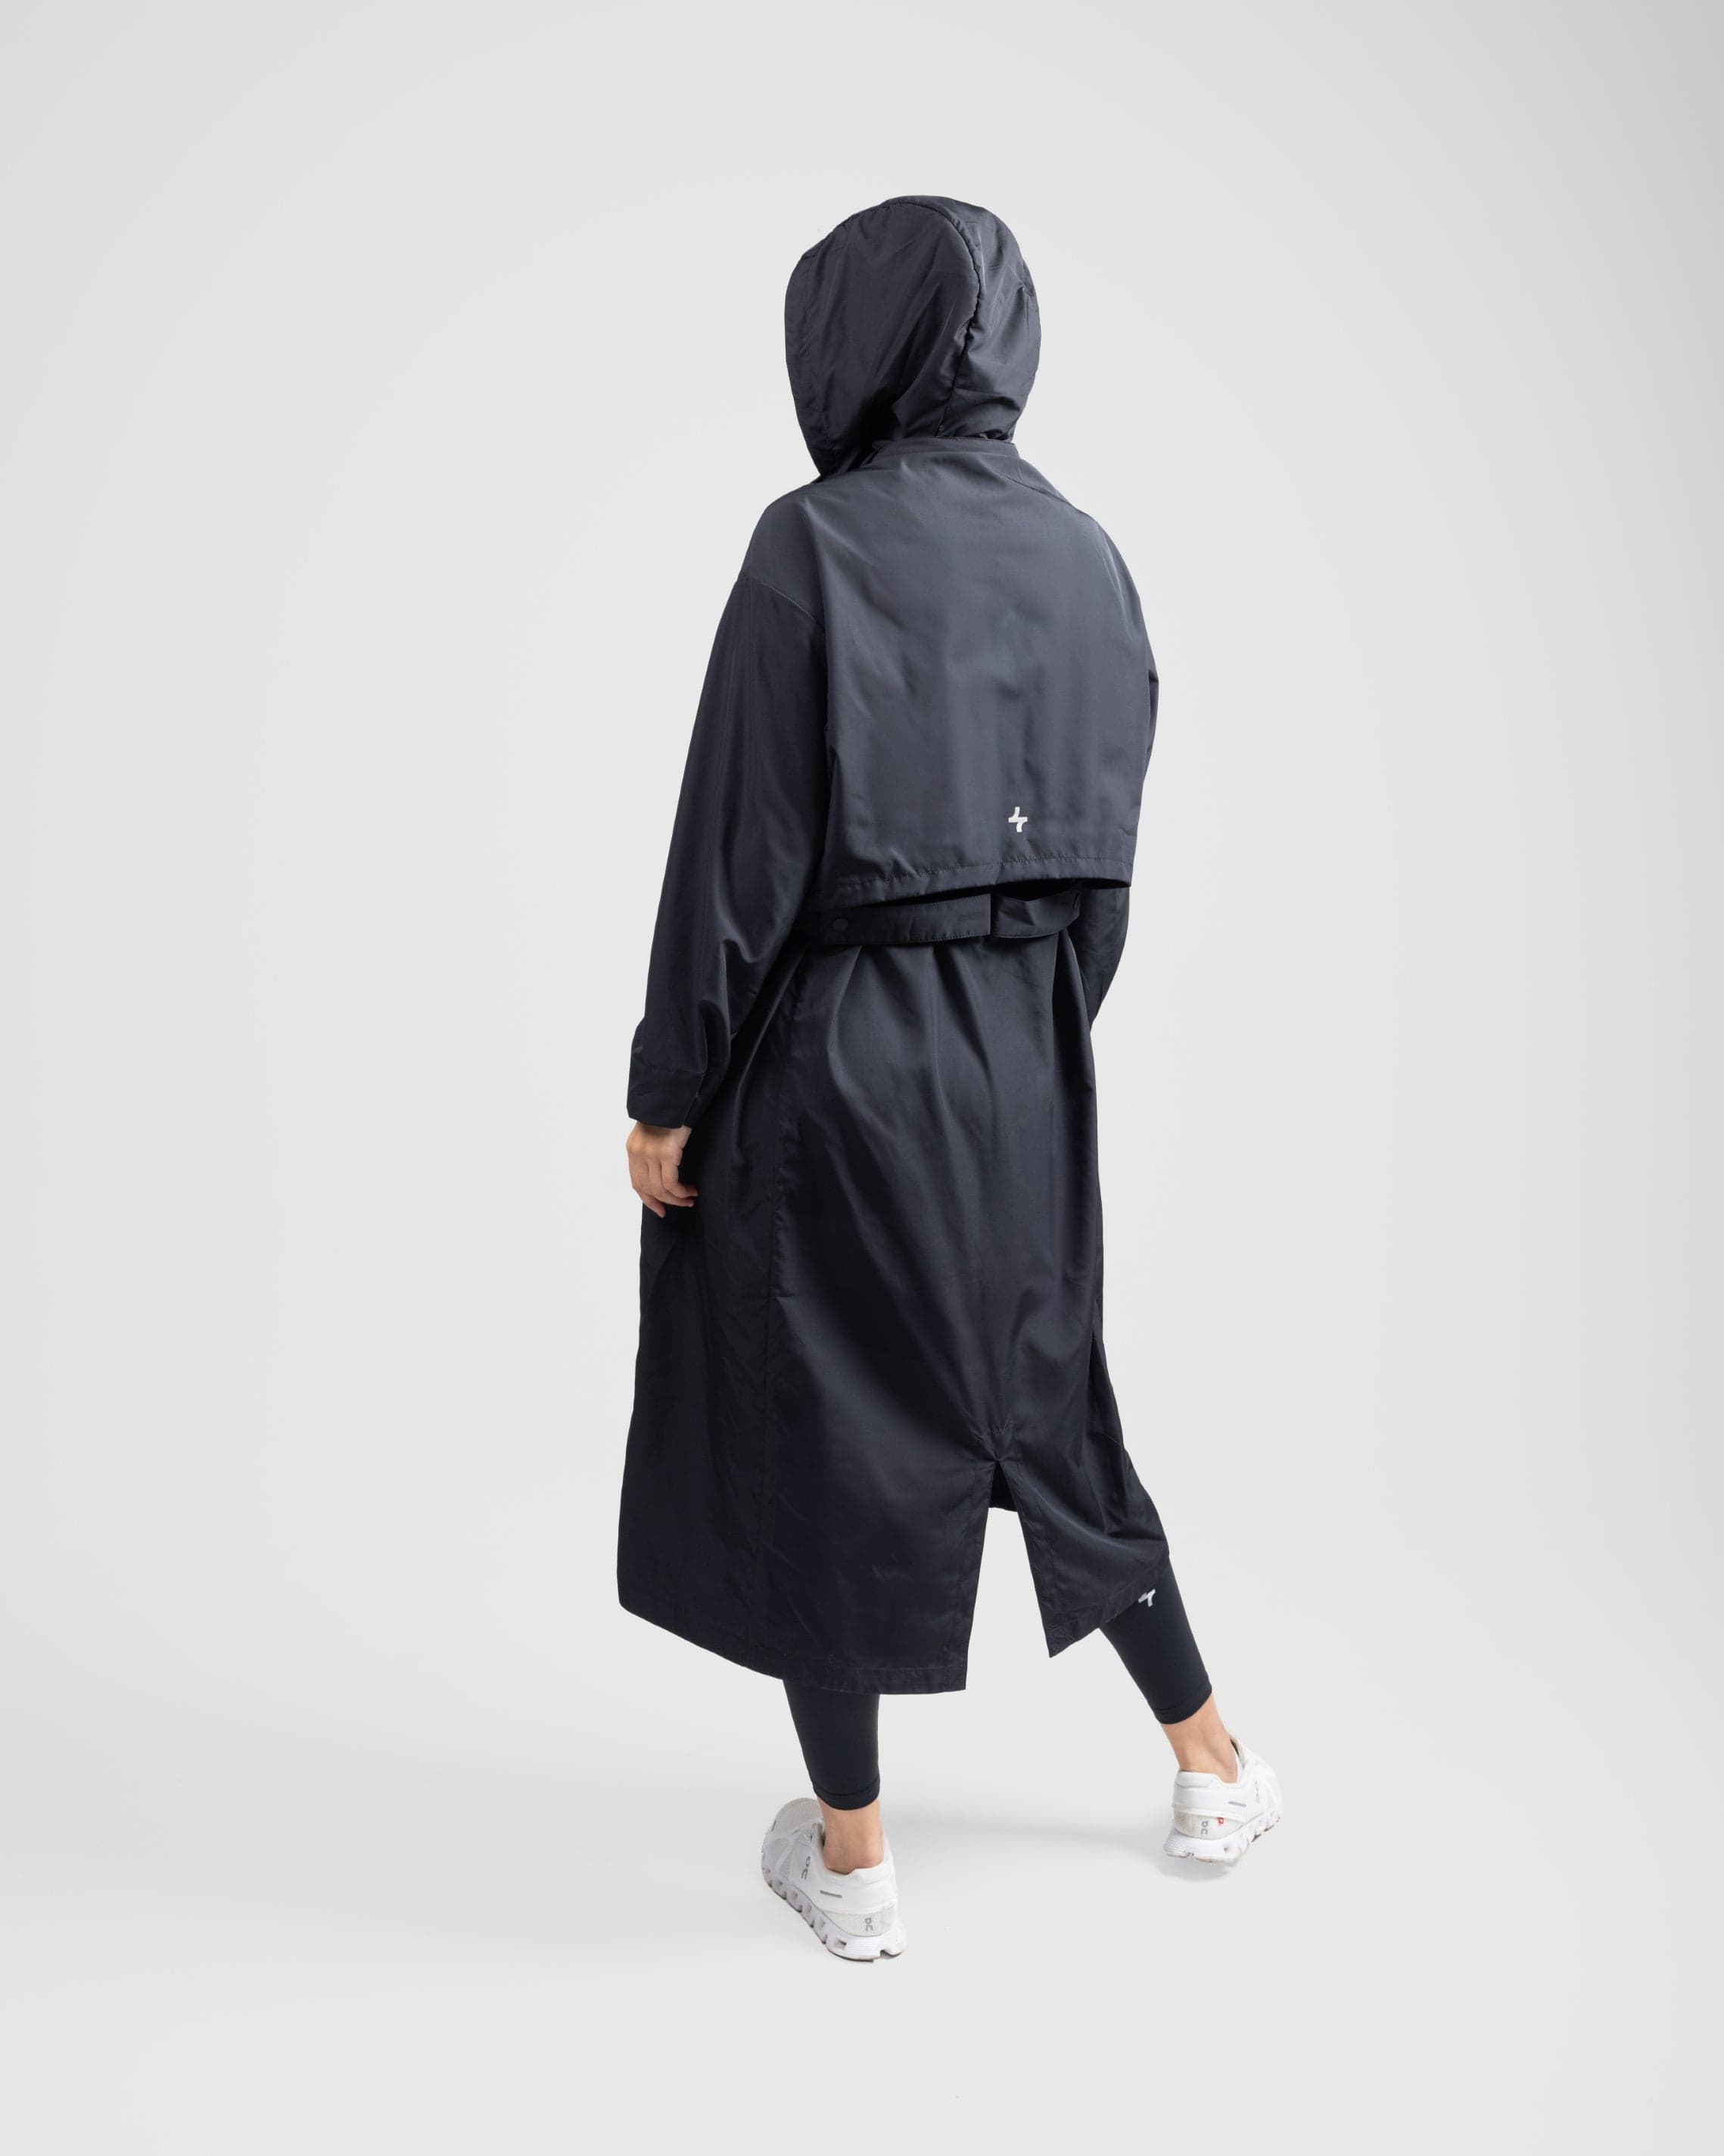  A model from behind wearing a black MAK LIGHT PARKA by Qynda with a hood and white breathable mesh sneakers, walking to the right on a plain light gray background.